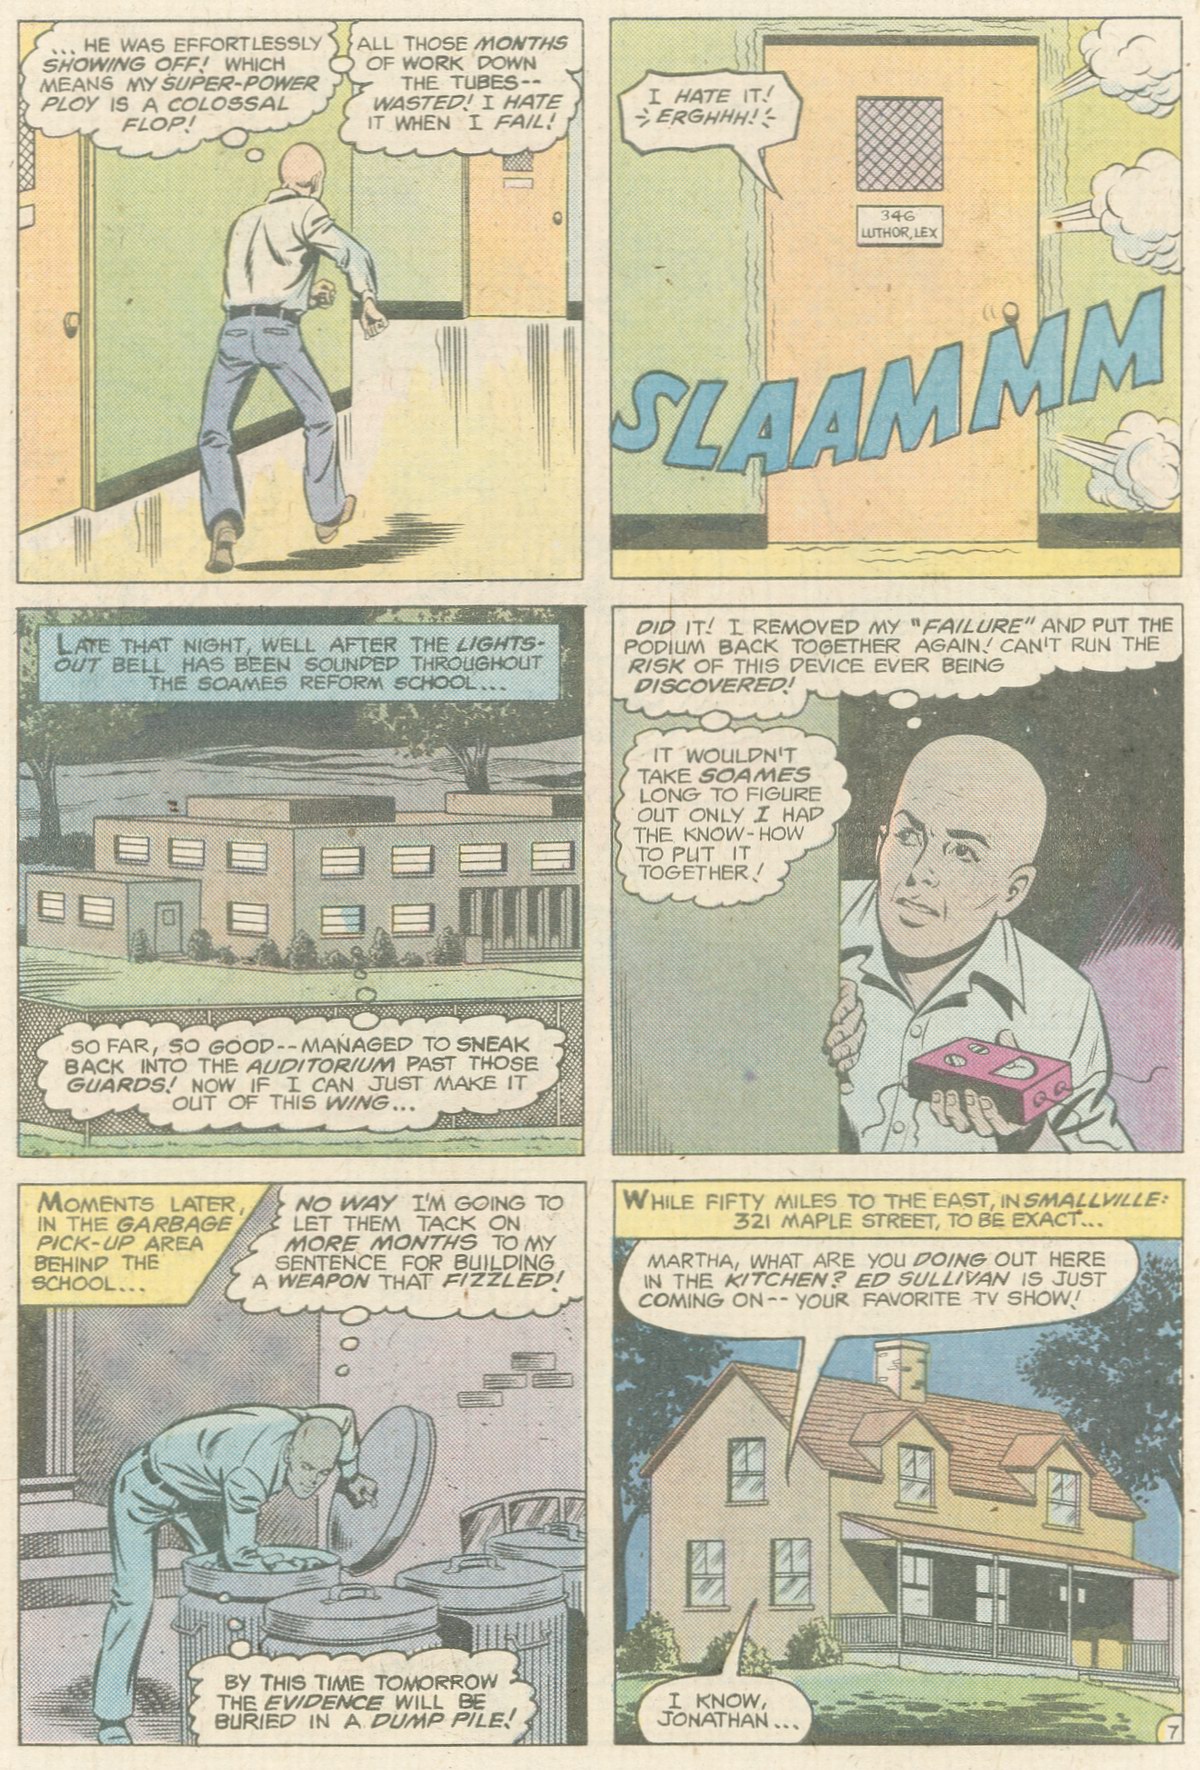 The New Adventures of Superboy 14 Page 7